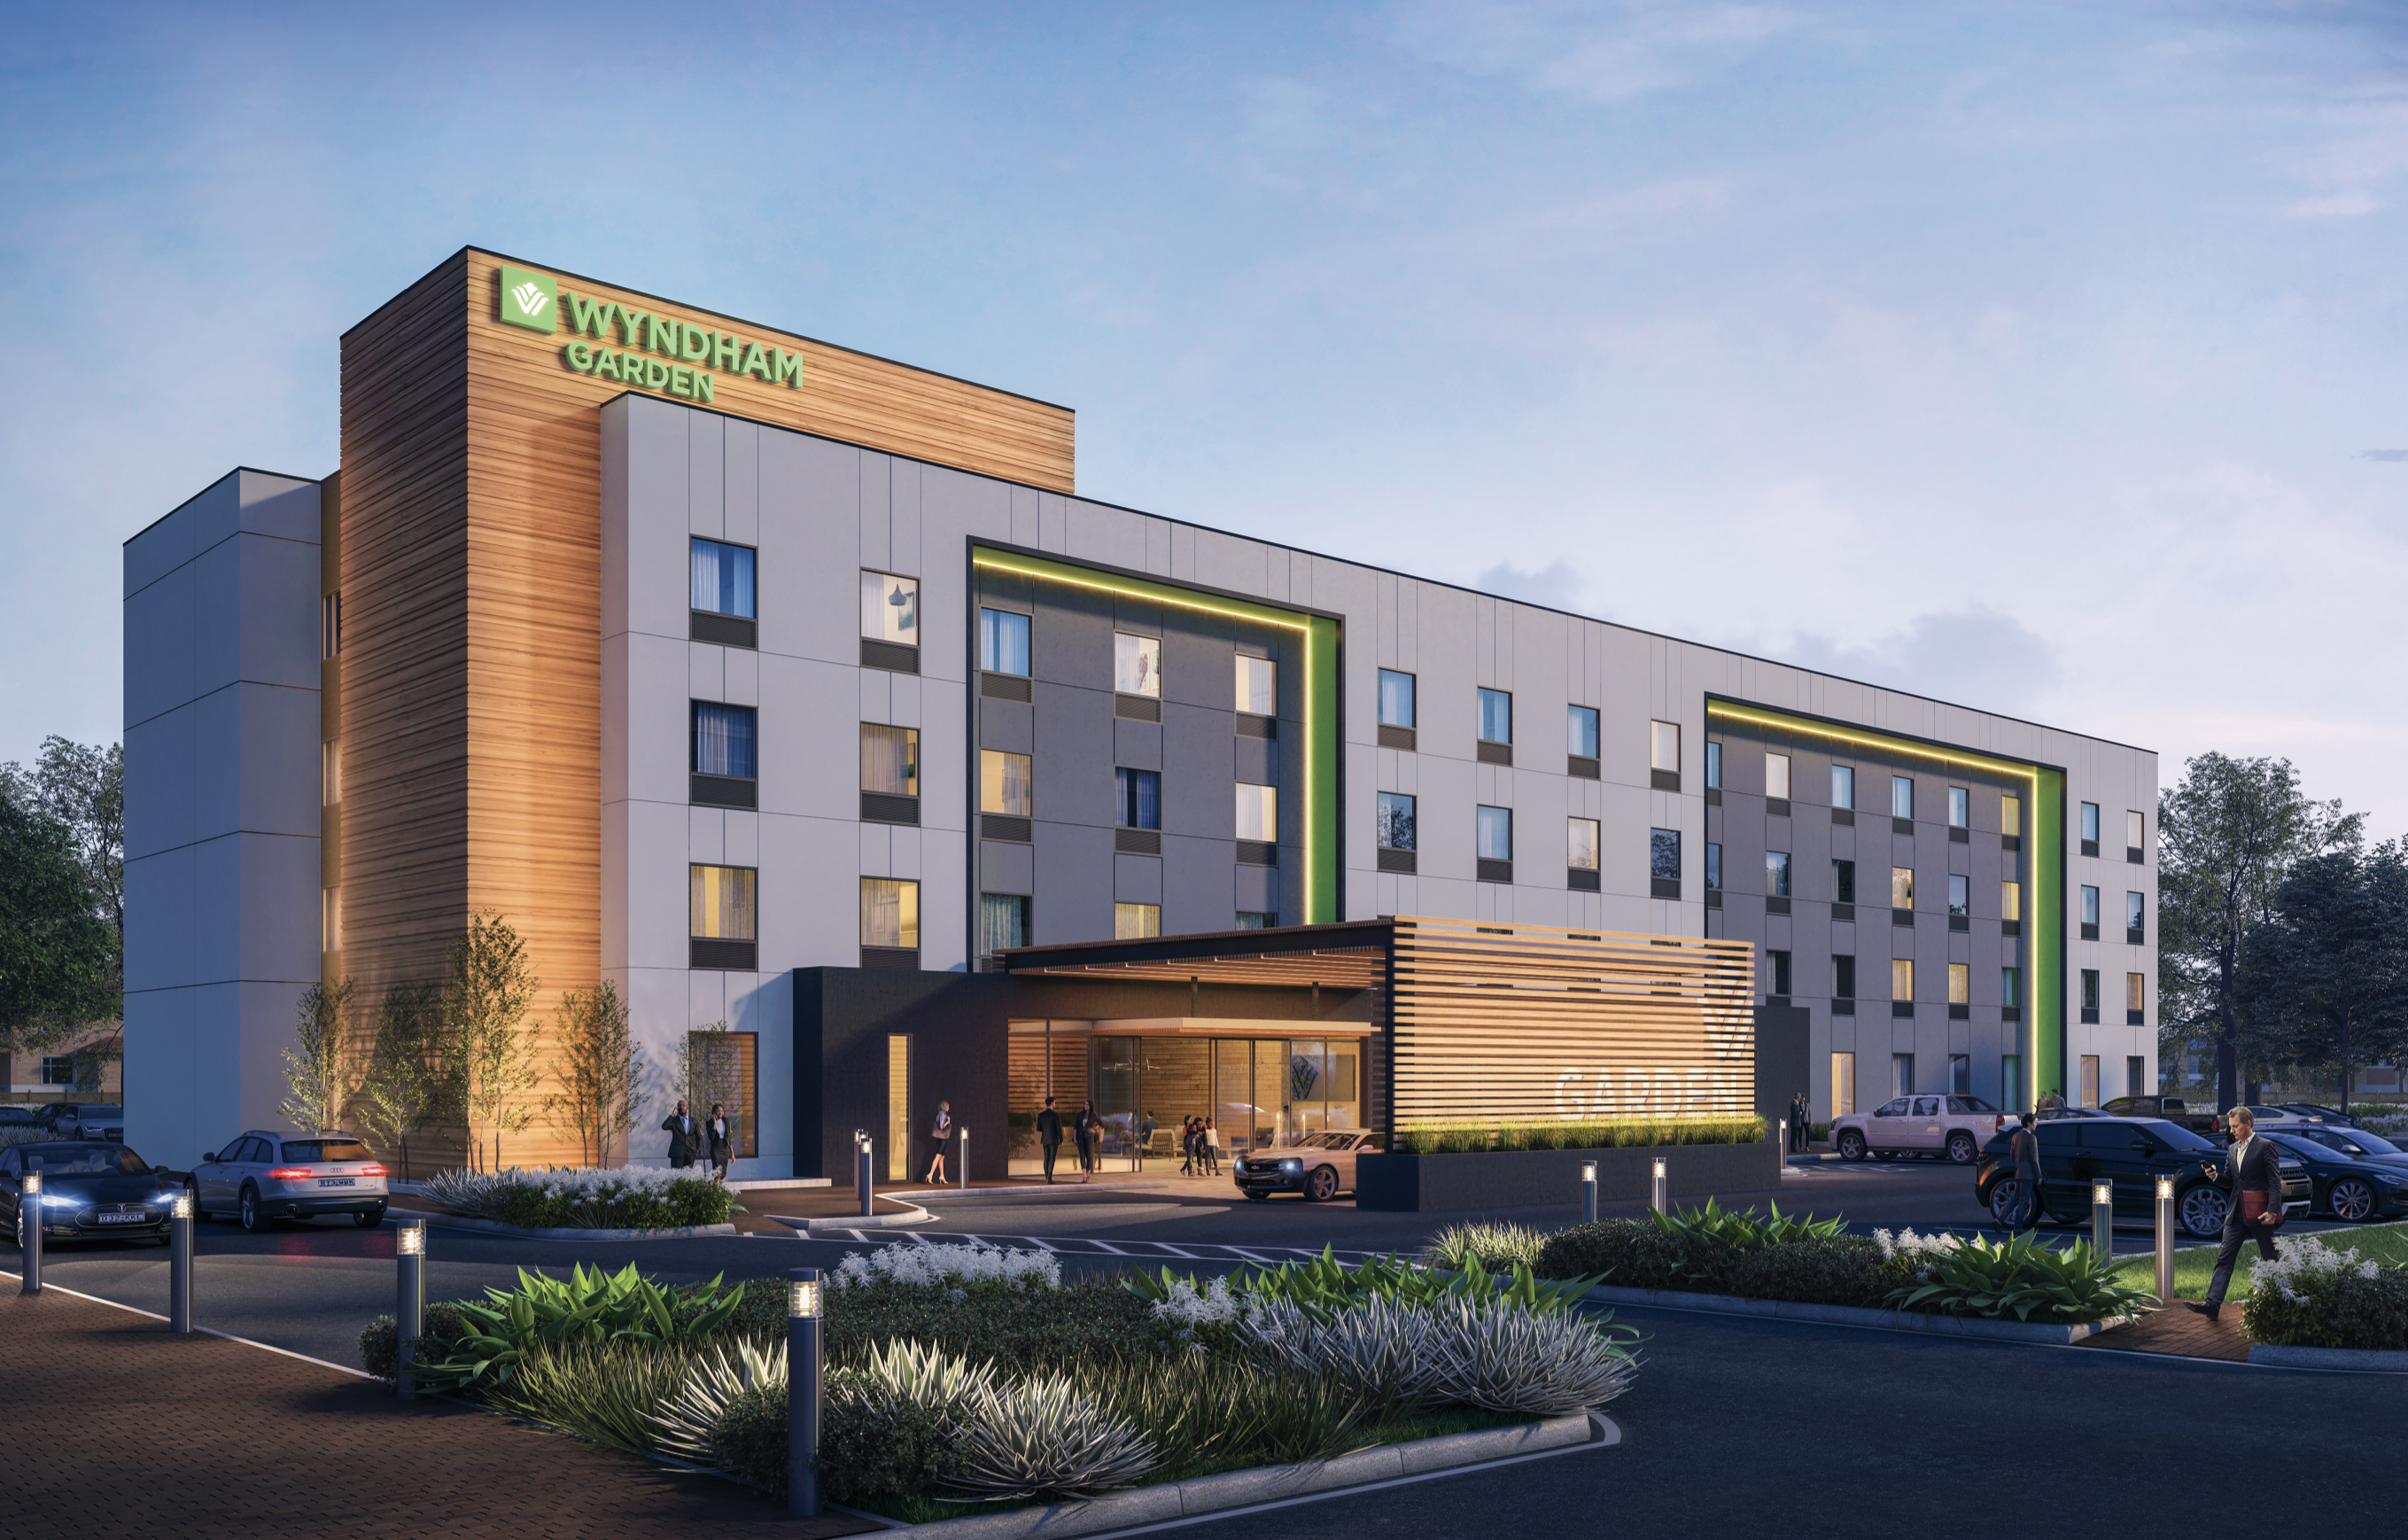 The new Arbor prototype for the Wyndham Garden brand takes up four stories and has 110 guestrooms